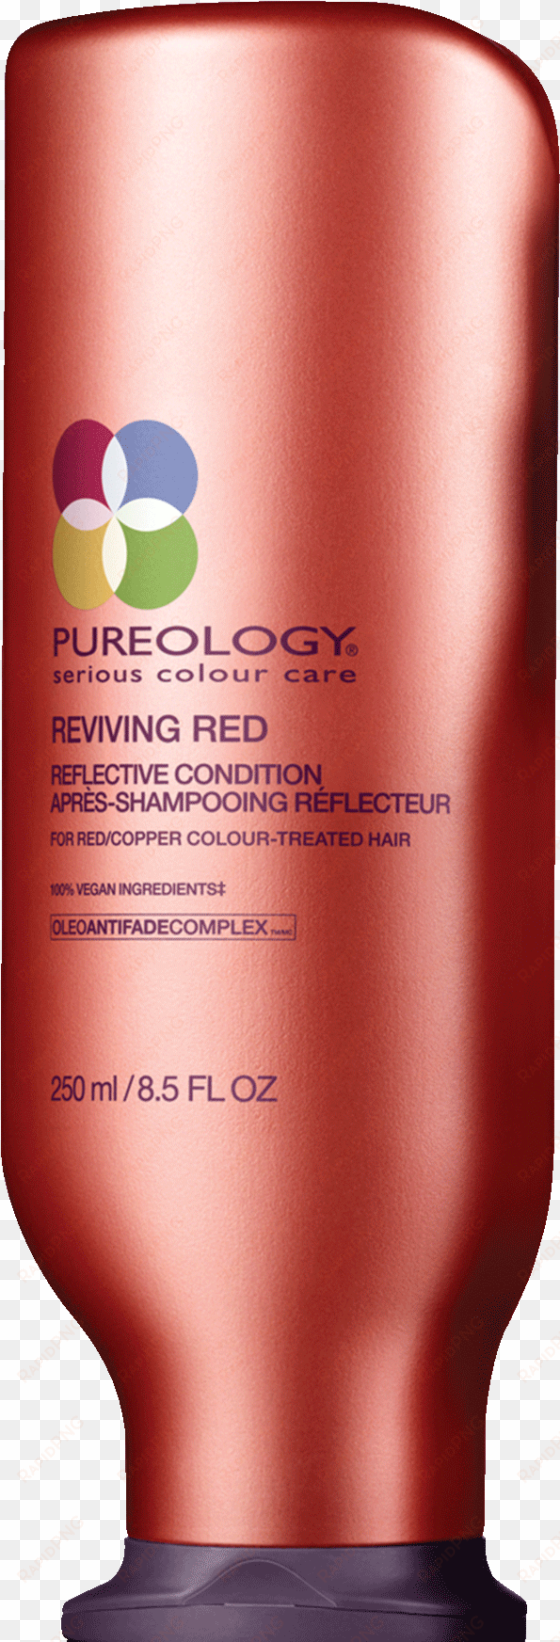 reviving red reflective hair conditioner - pureology reviving red reflective conditioner, 8.5